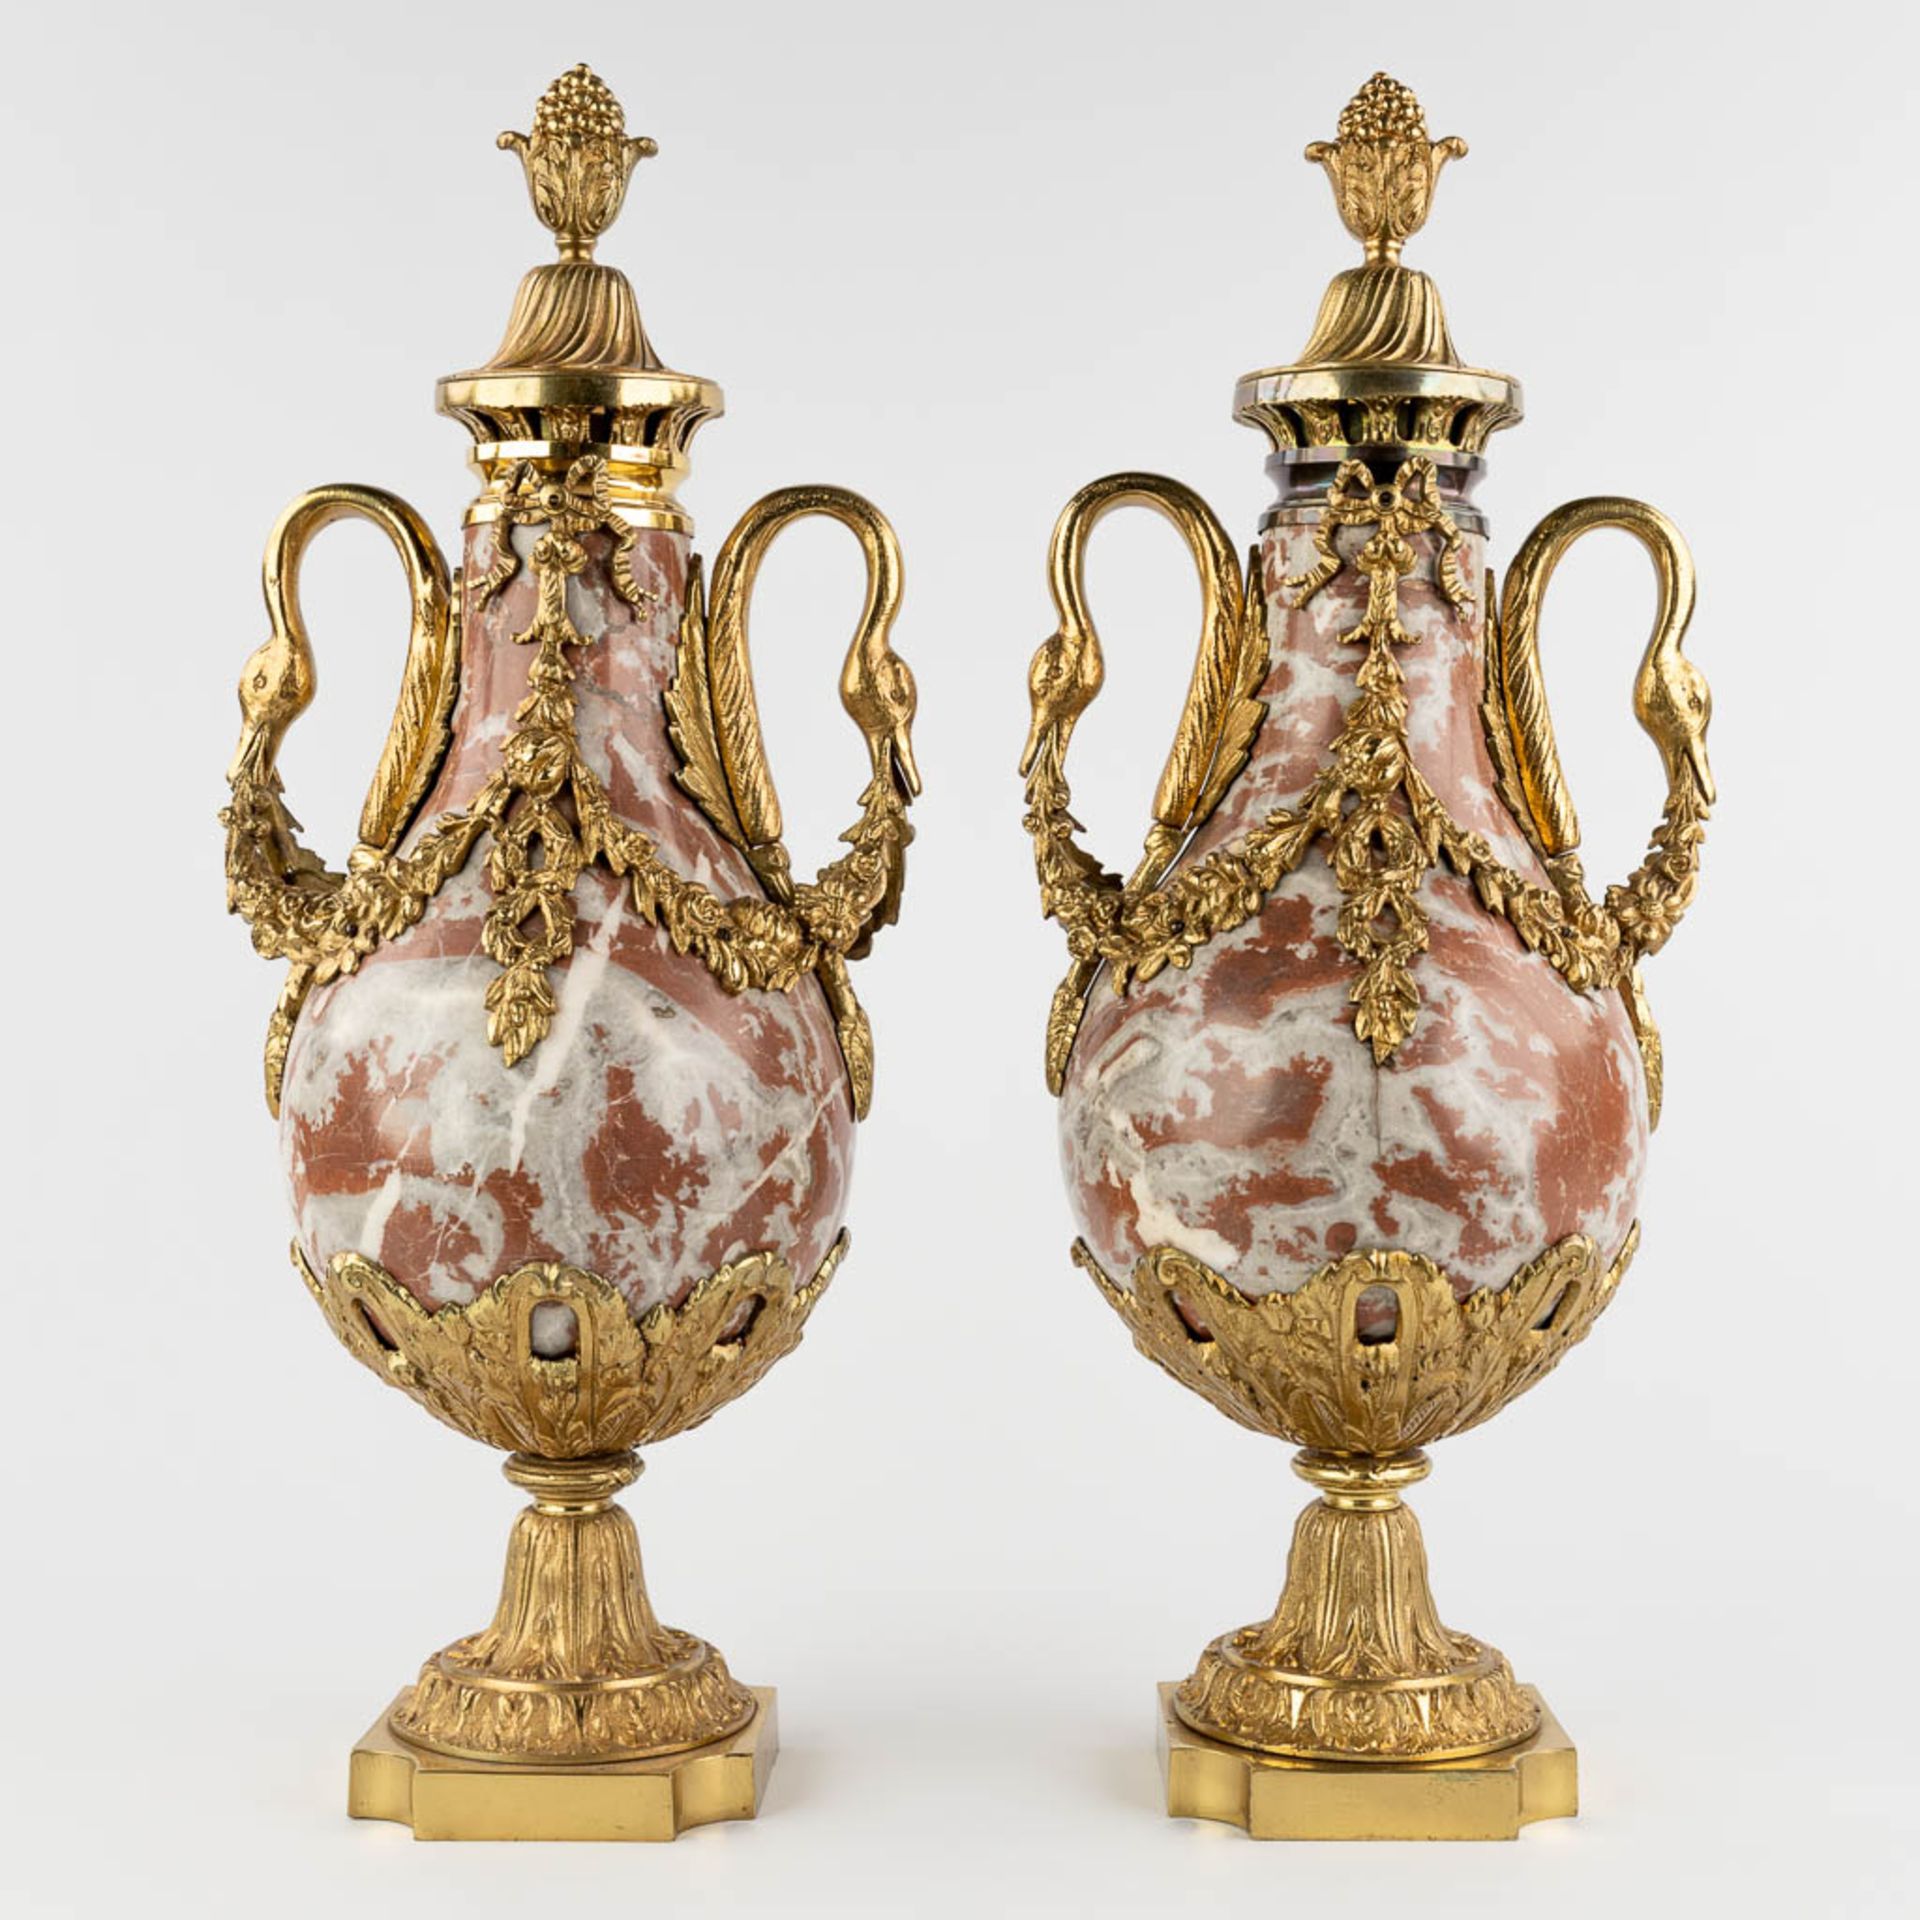 A pair of cassolettes, red and grey marble mounted with bronze in Empire style. (D:18 x W:23 x H:54  - Bild 3 aus 13